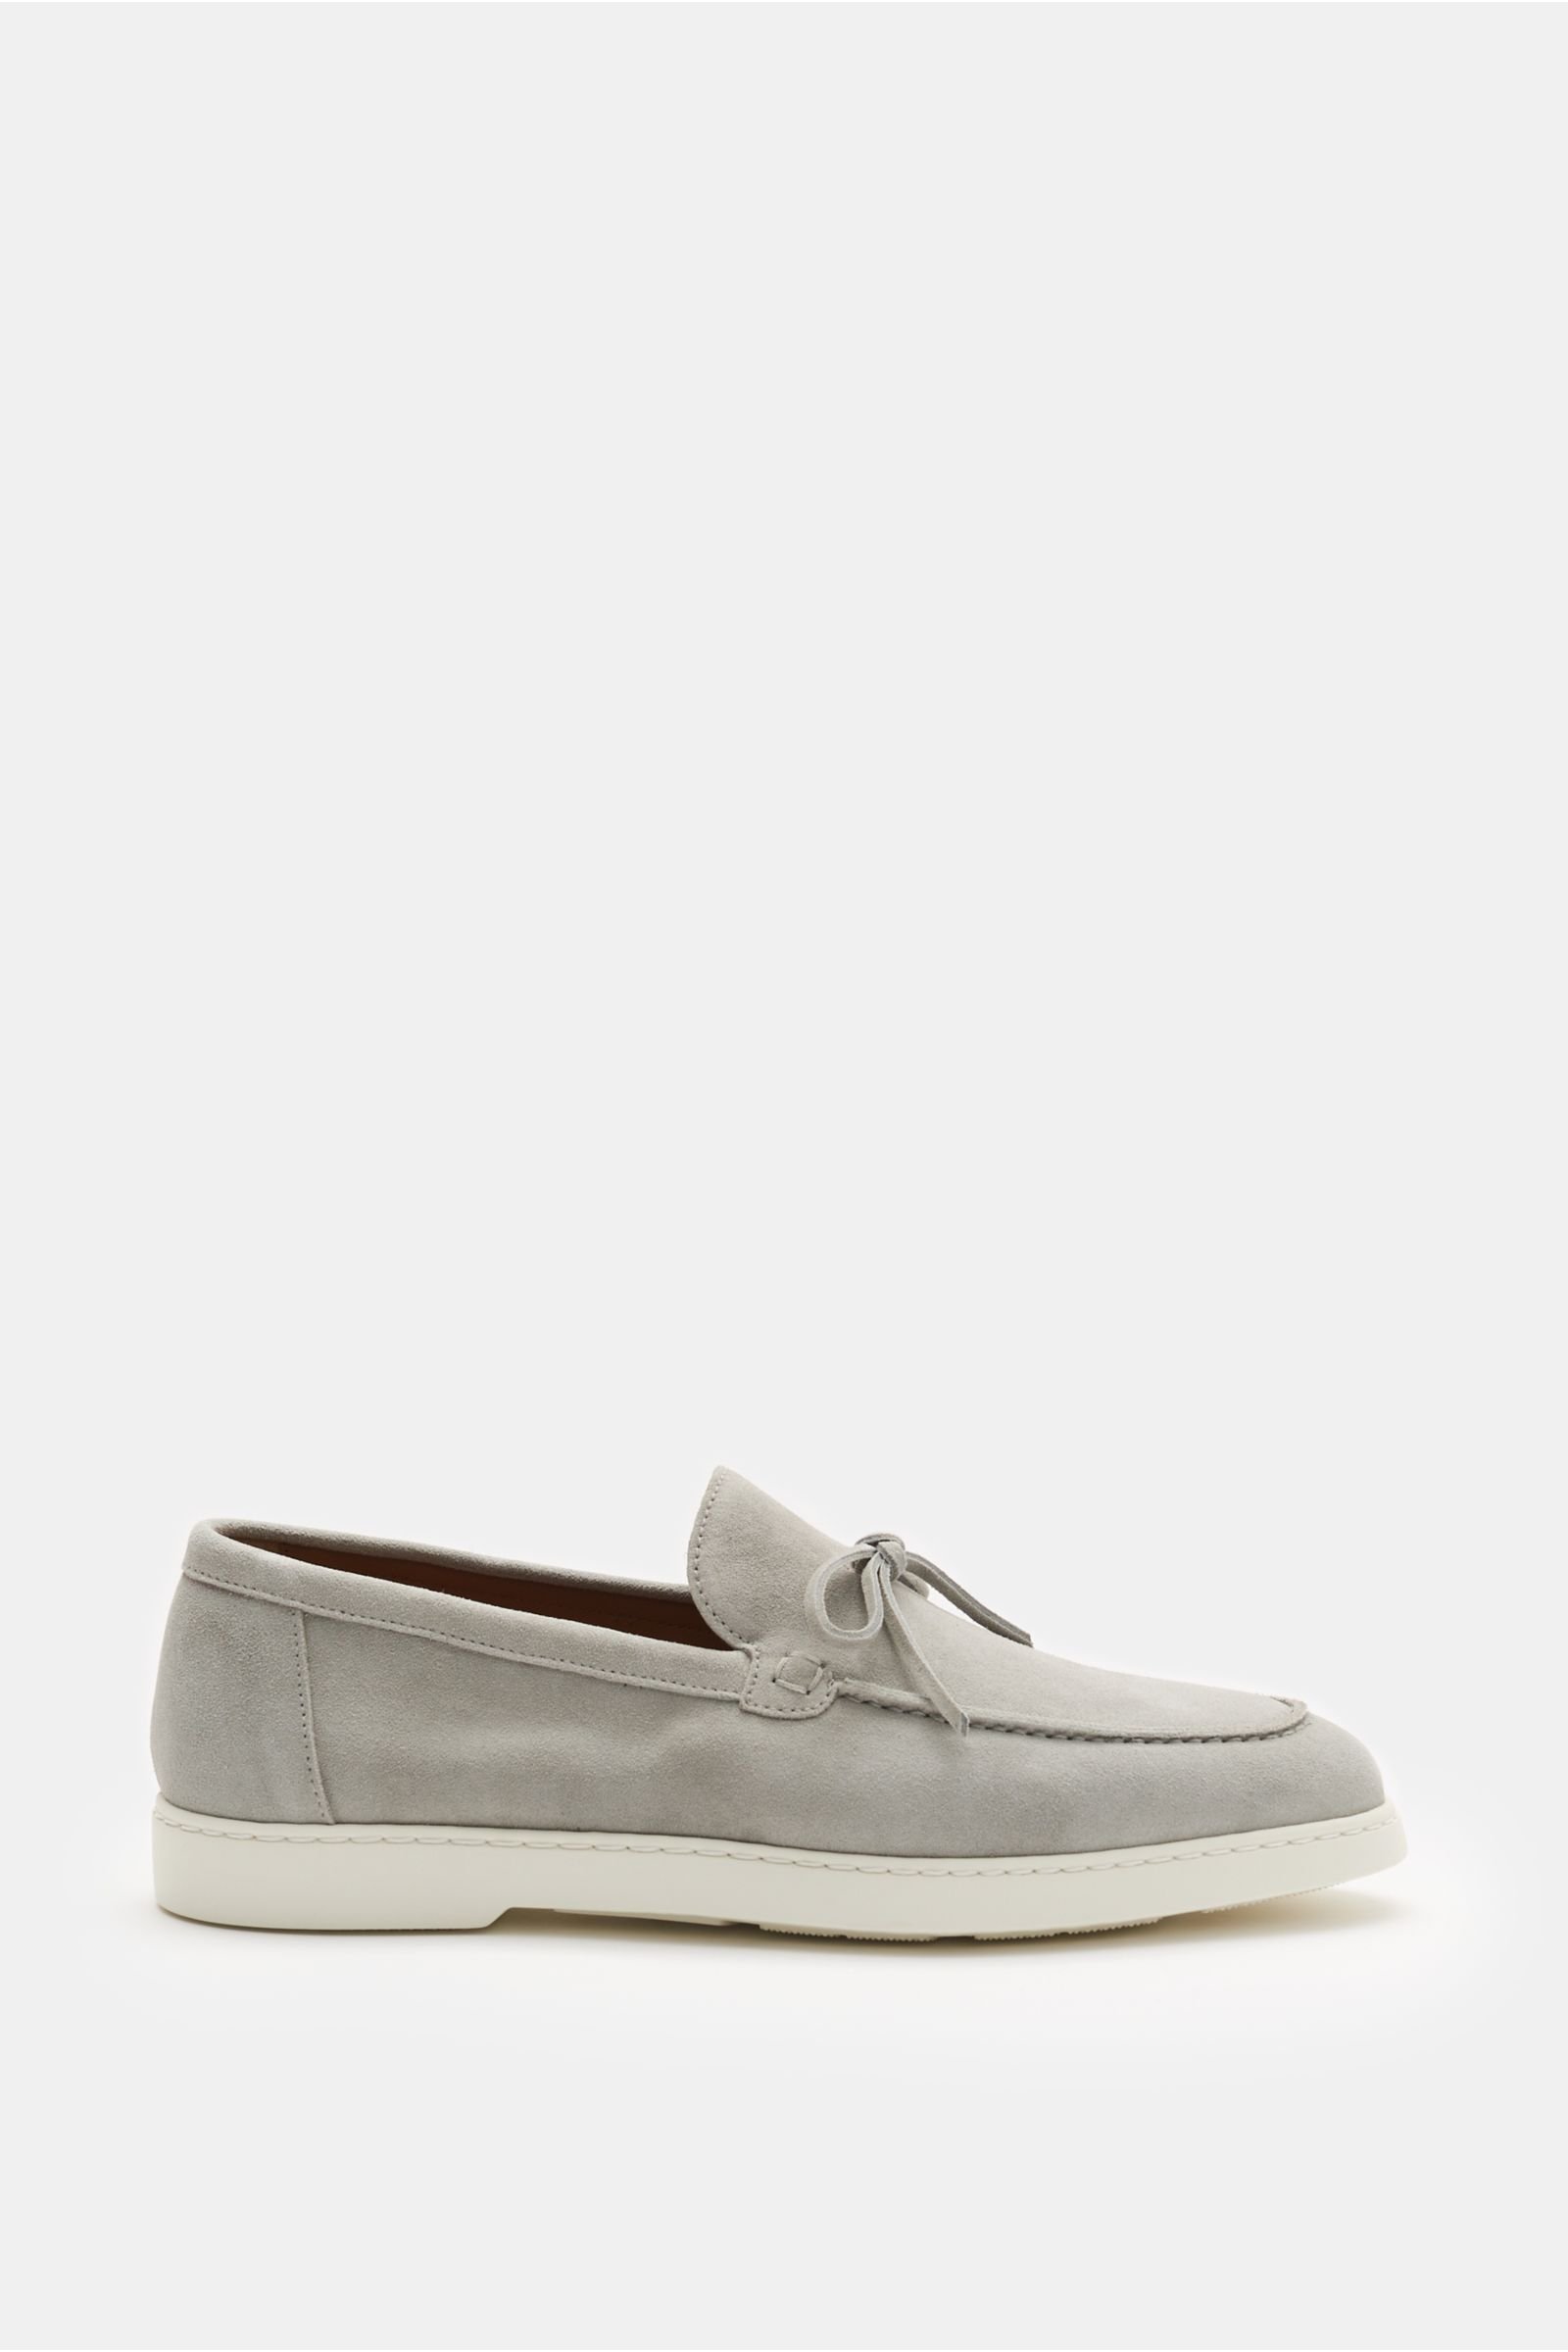 Boat shoes grey